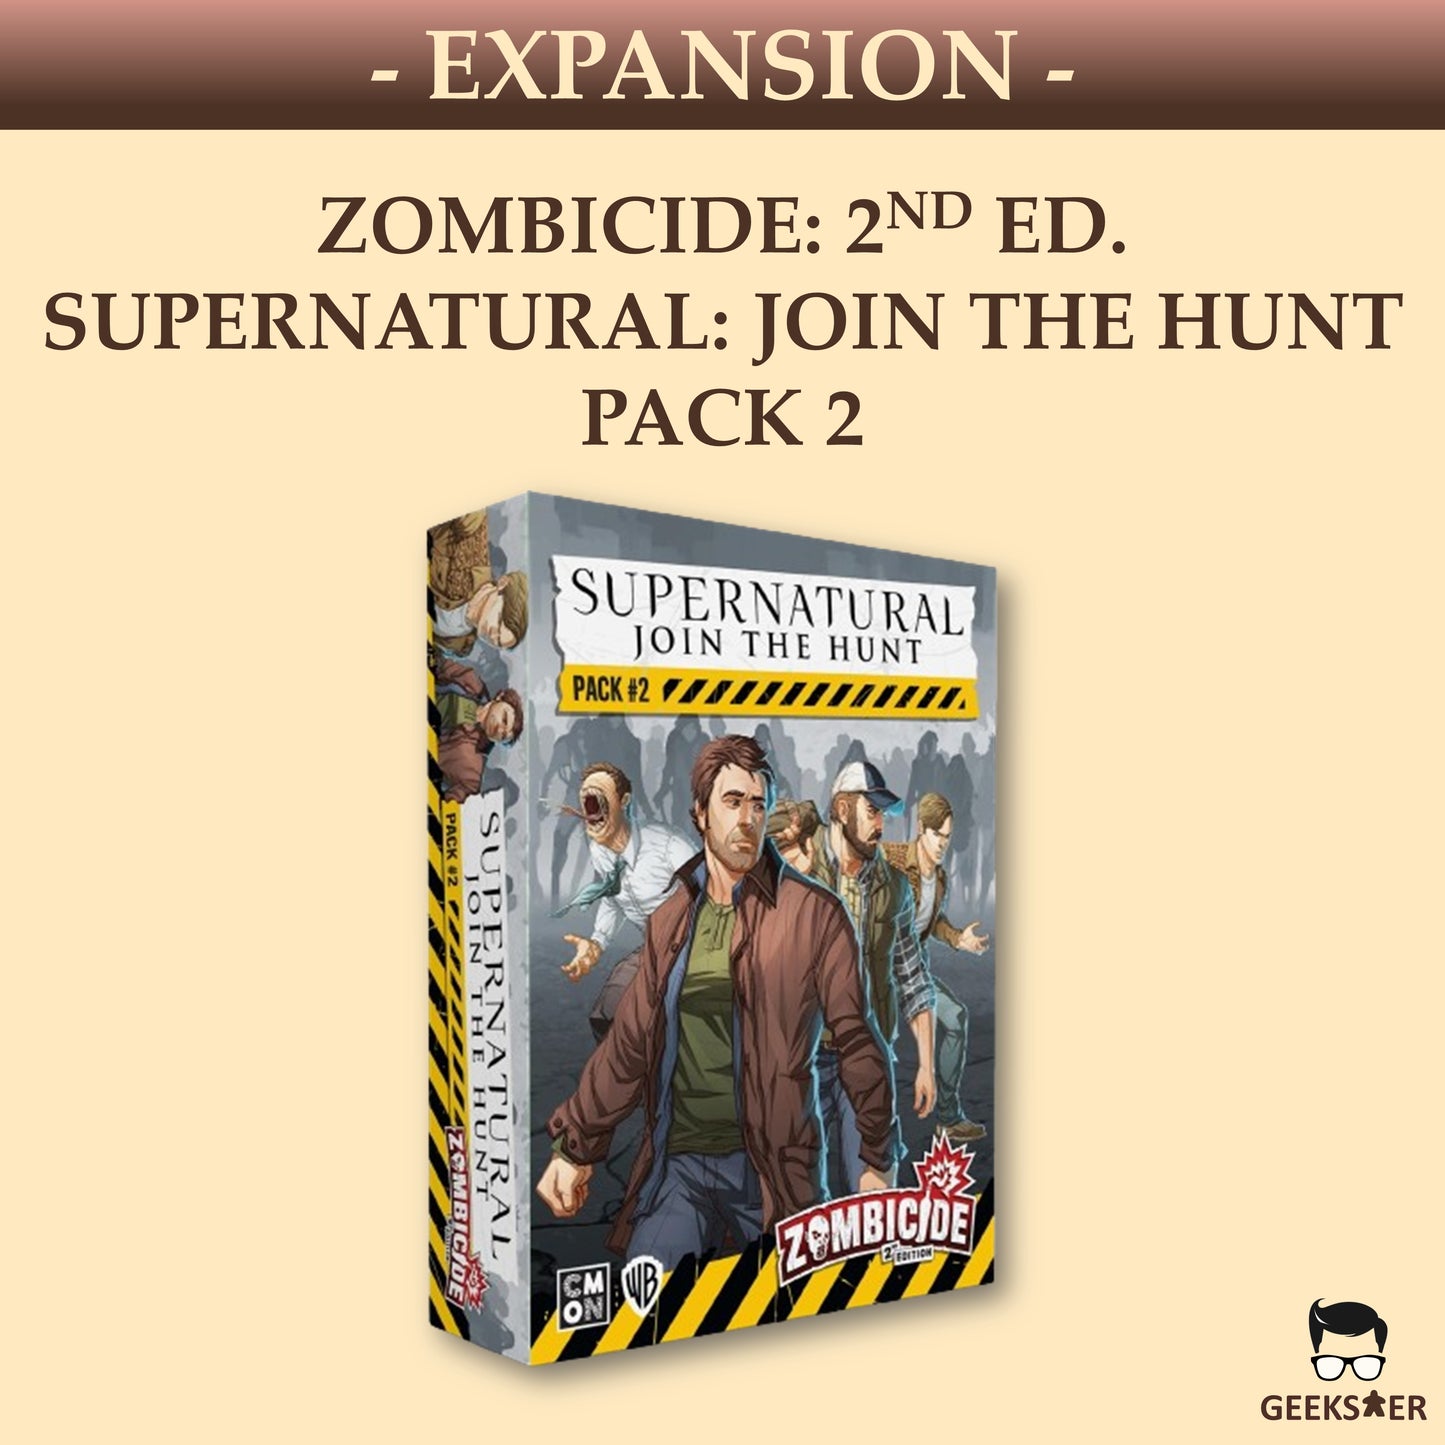 Zombicide: 2nd Edition - Supernatural: Join the Hunt Pack